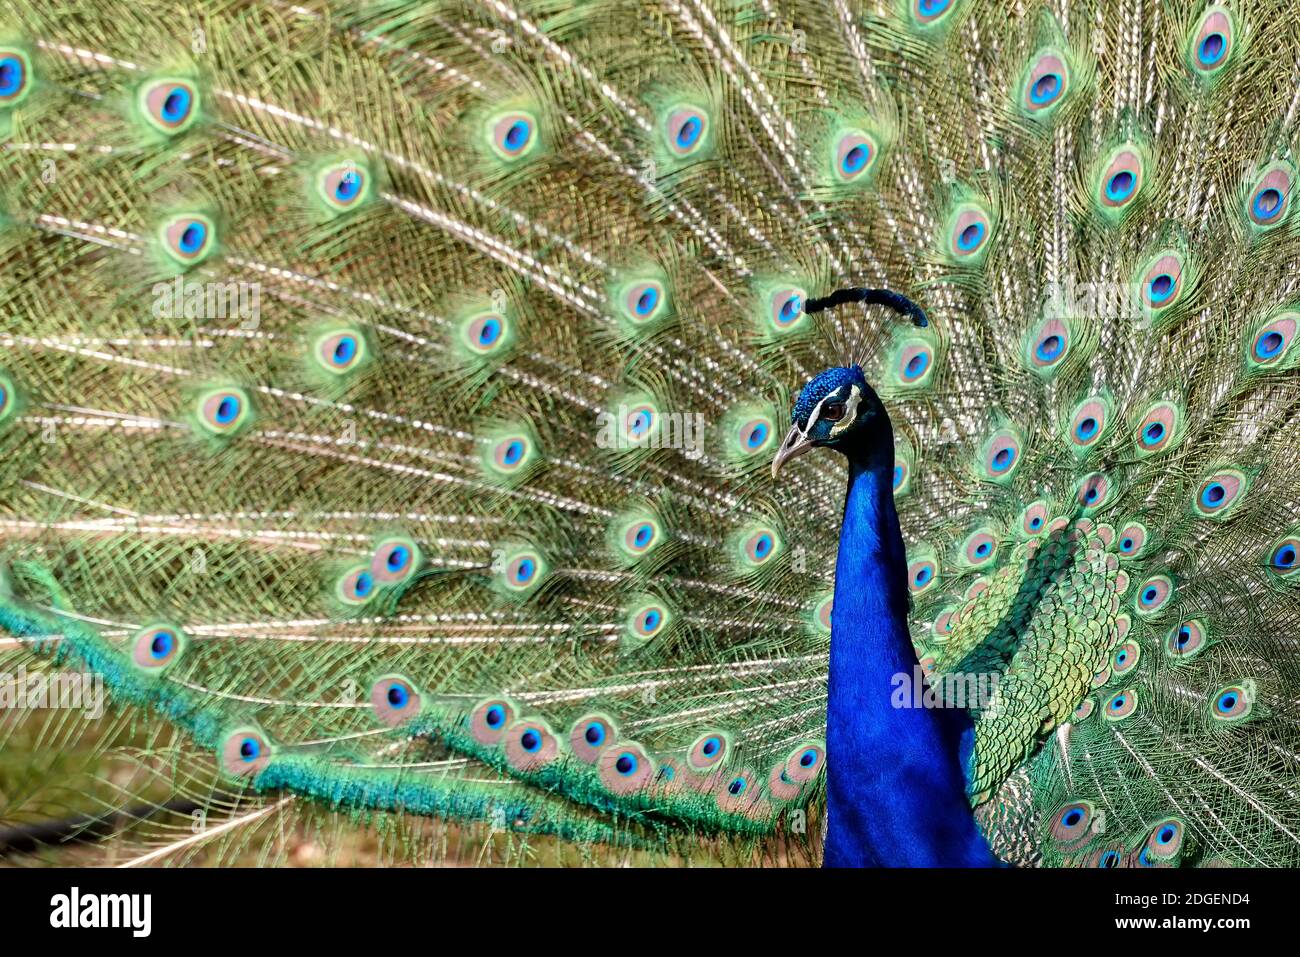 Peacock with colorful feathers Stock Photo - Alamy